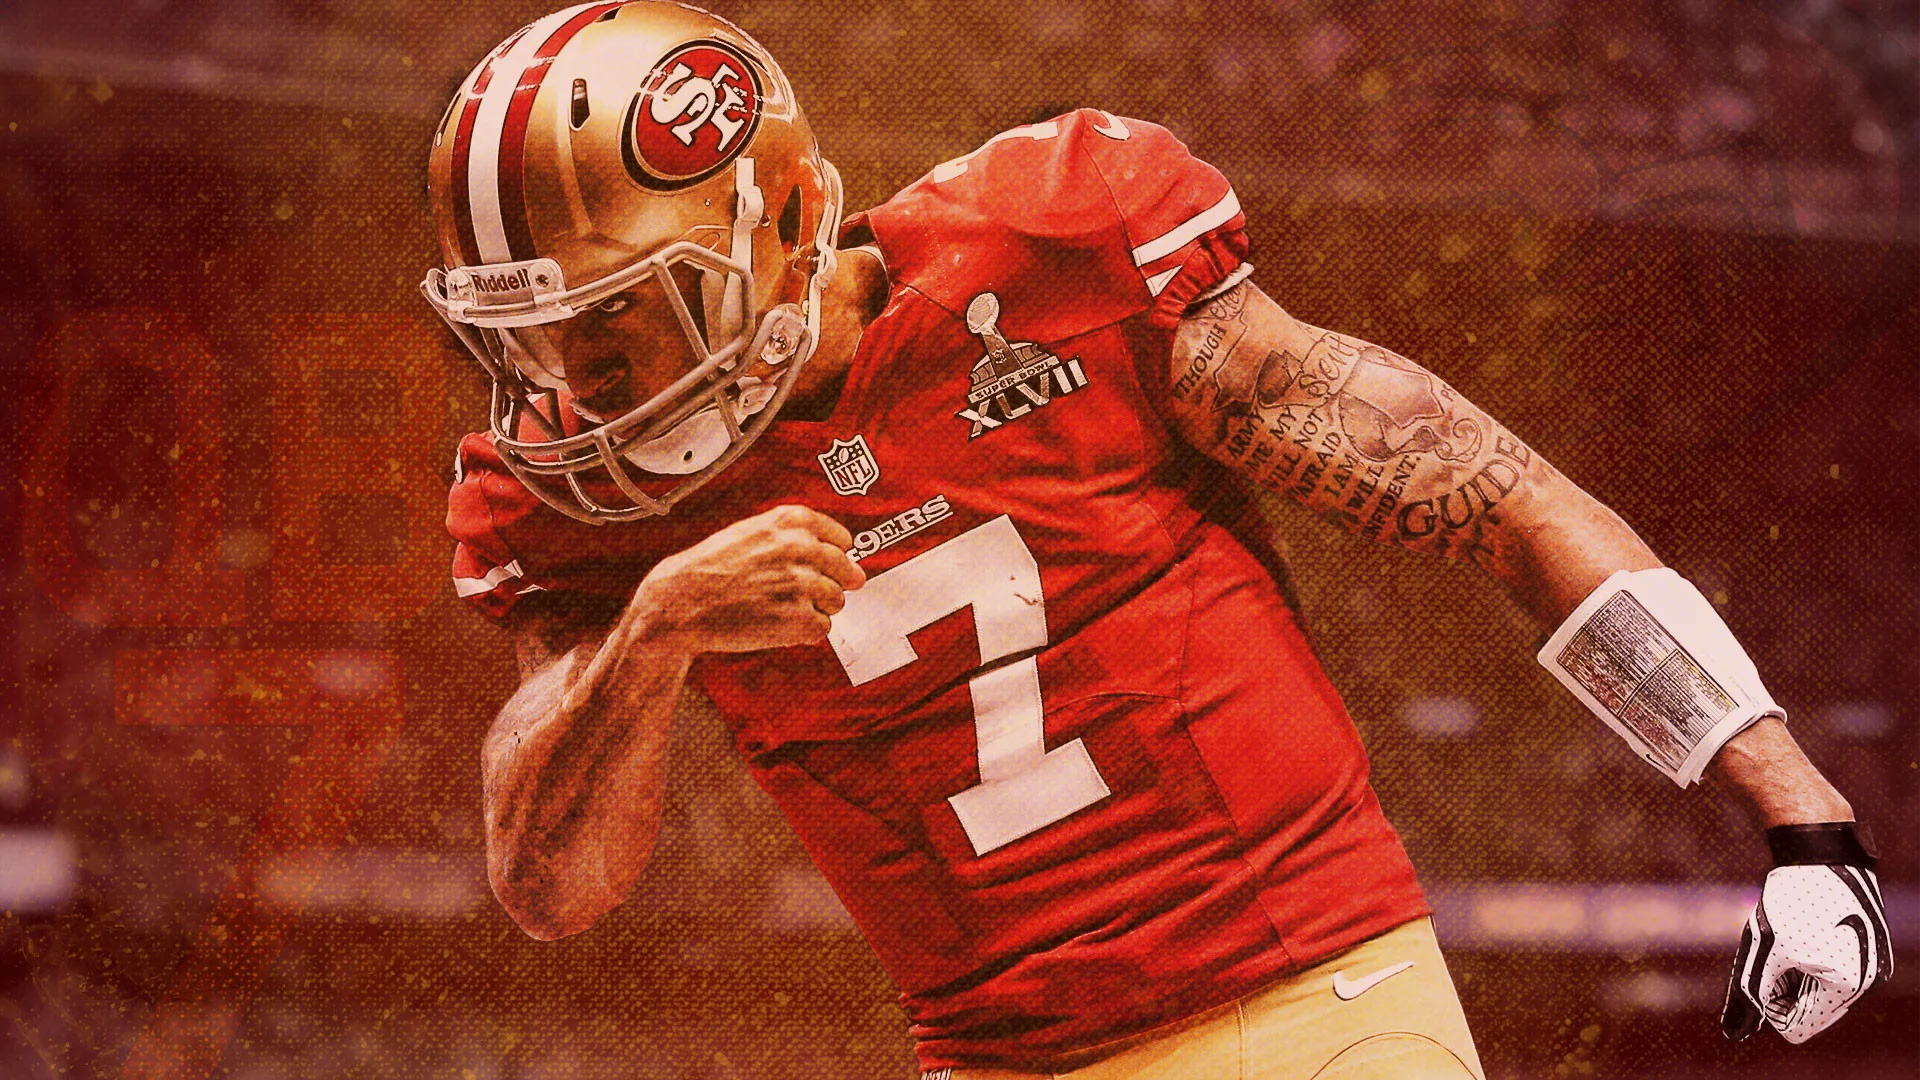 Hey / r / 49ers I made you guys a Colin Kaepernick wallpaper. I hope you guys enjoy Best of luck this season from a Pats fan